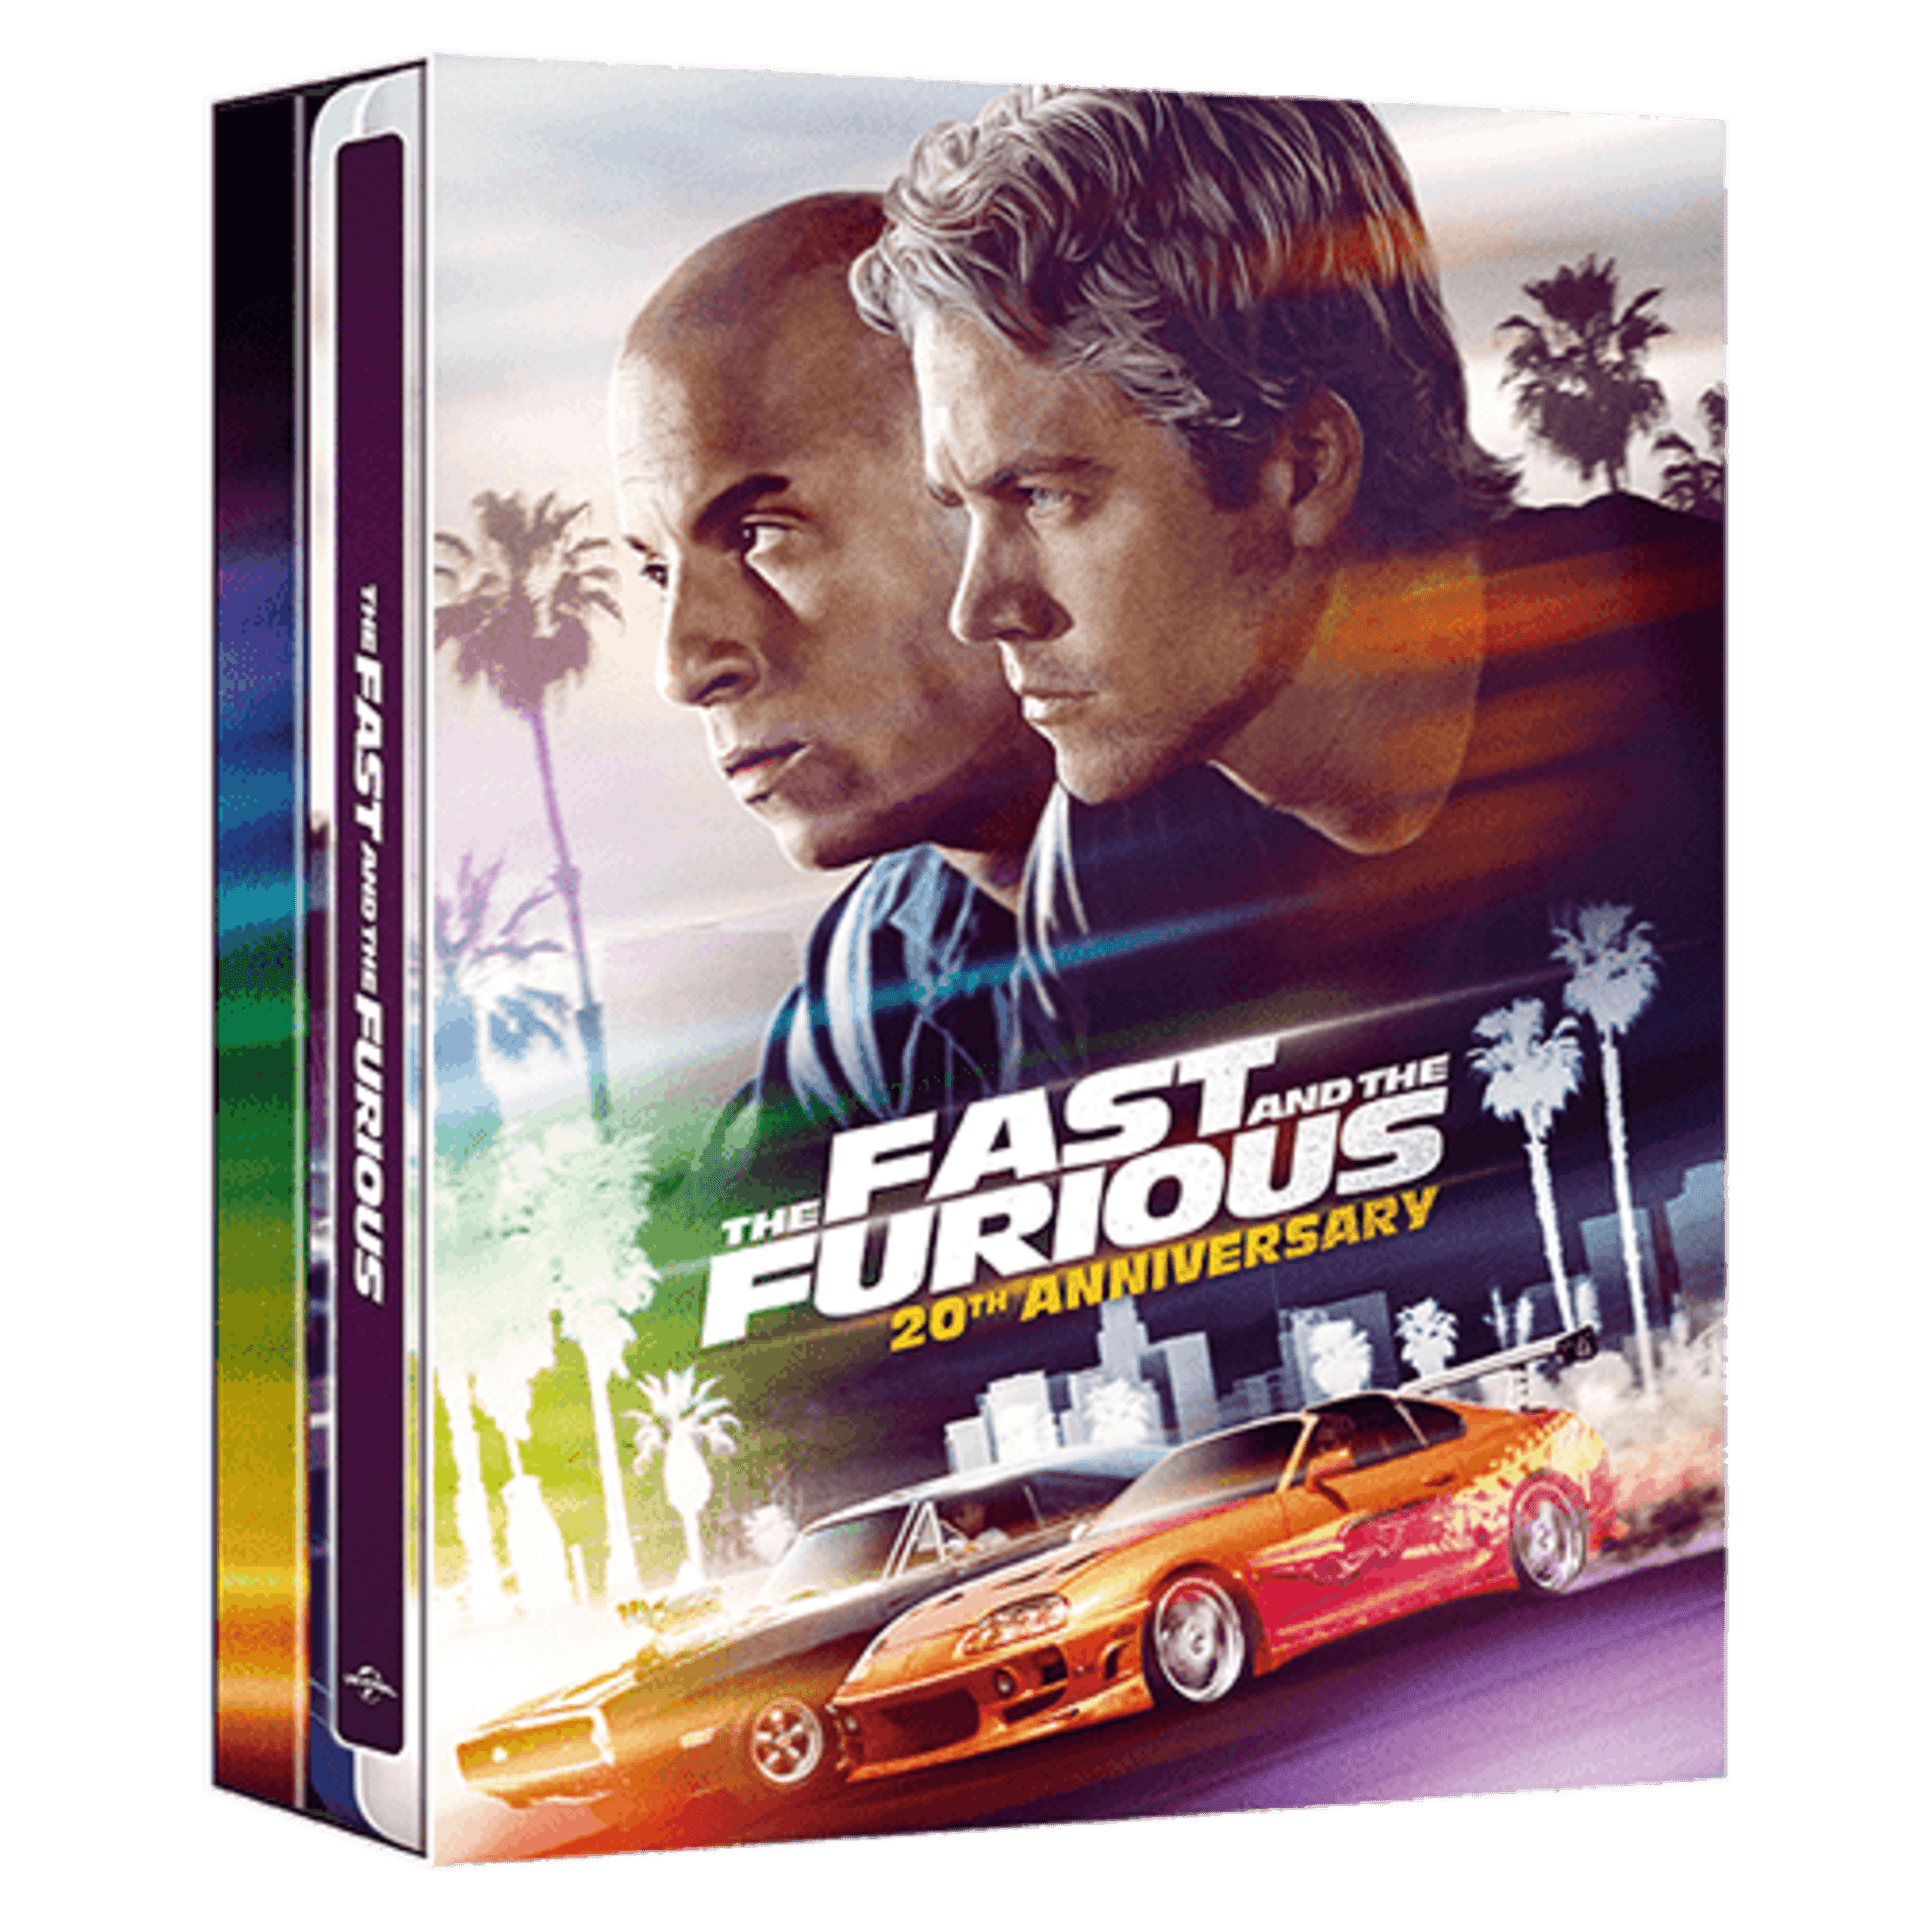 Fastand Furious20th Anniversary Box Set PNG